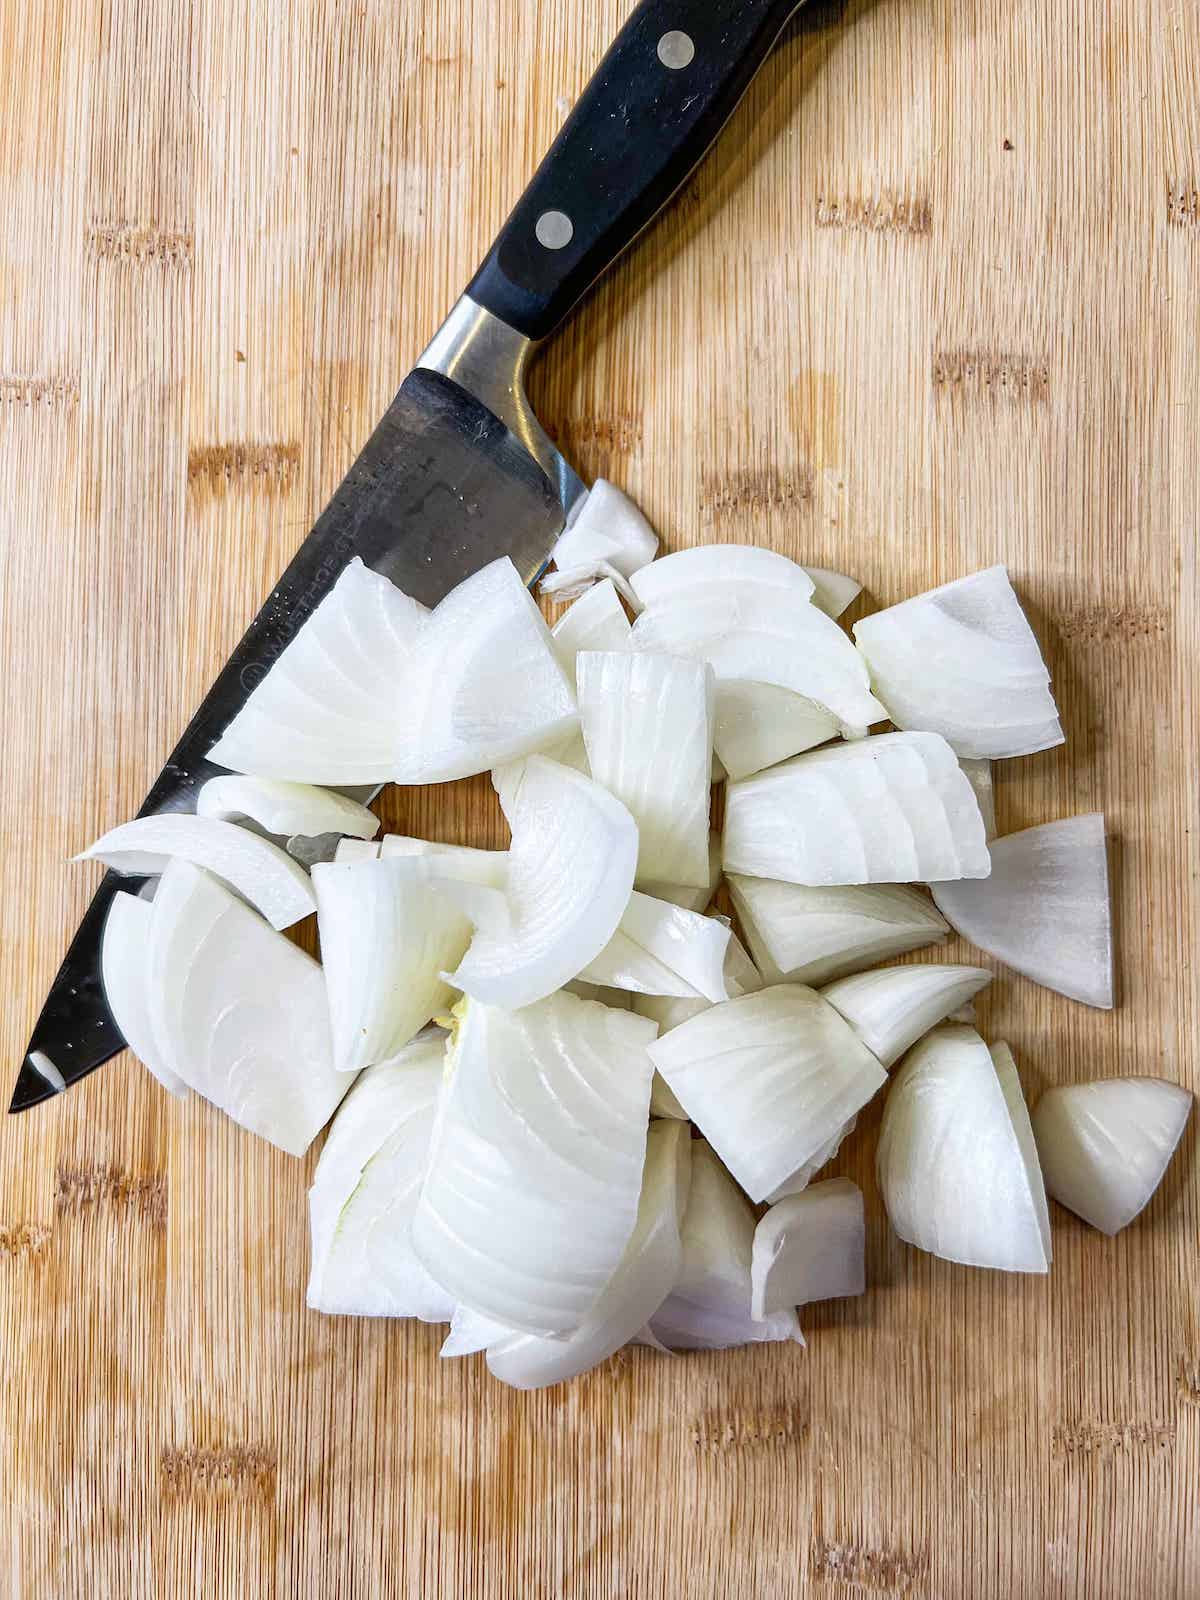 Onion cut into chunks on a wood cutting board with a knife.